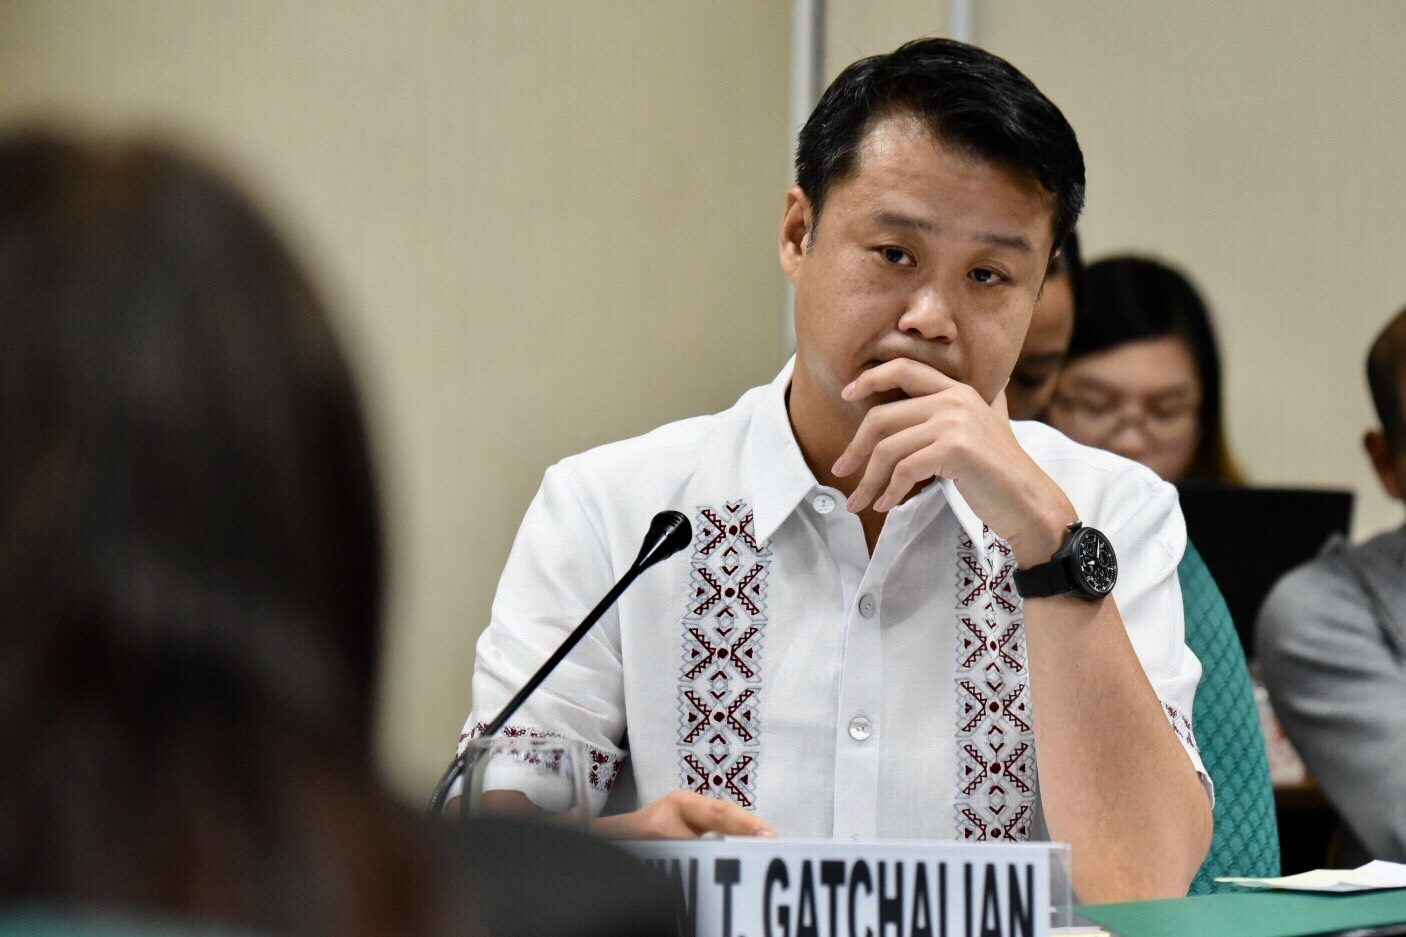 Gatchalian says ROTC bill to cost gov’t P38 billion a year if passed